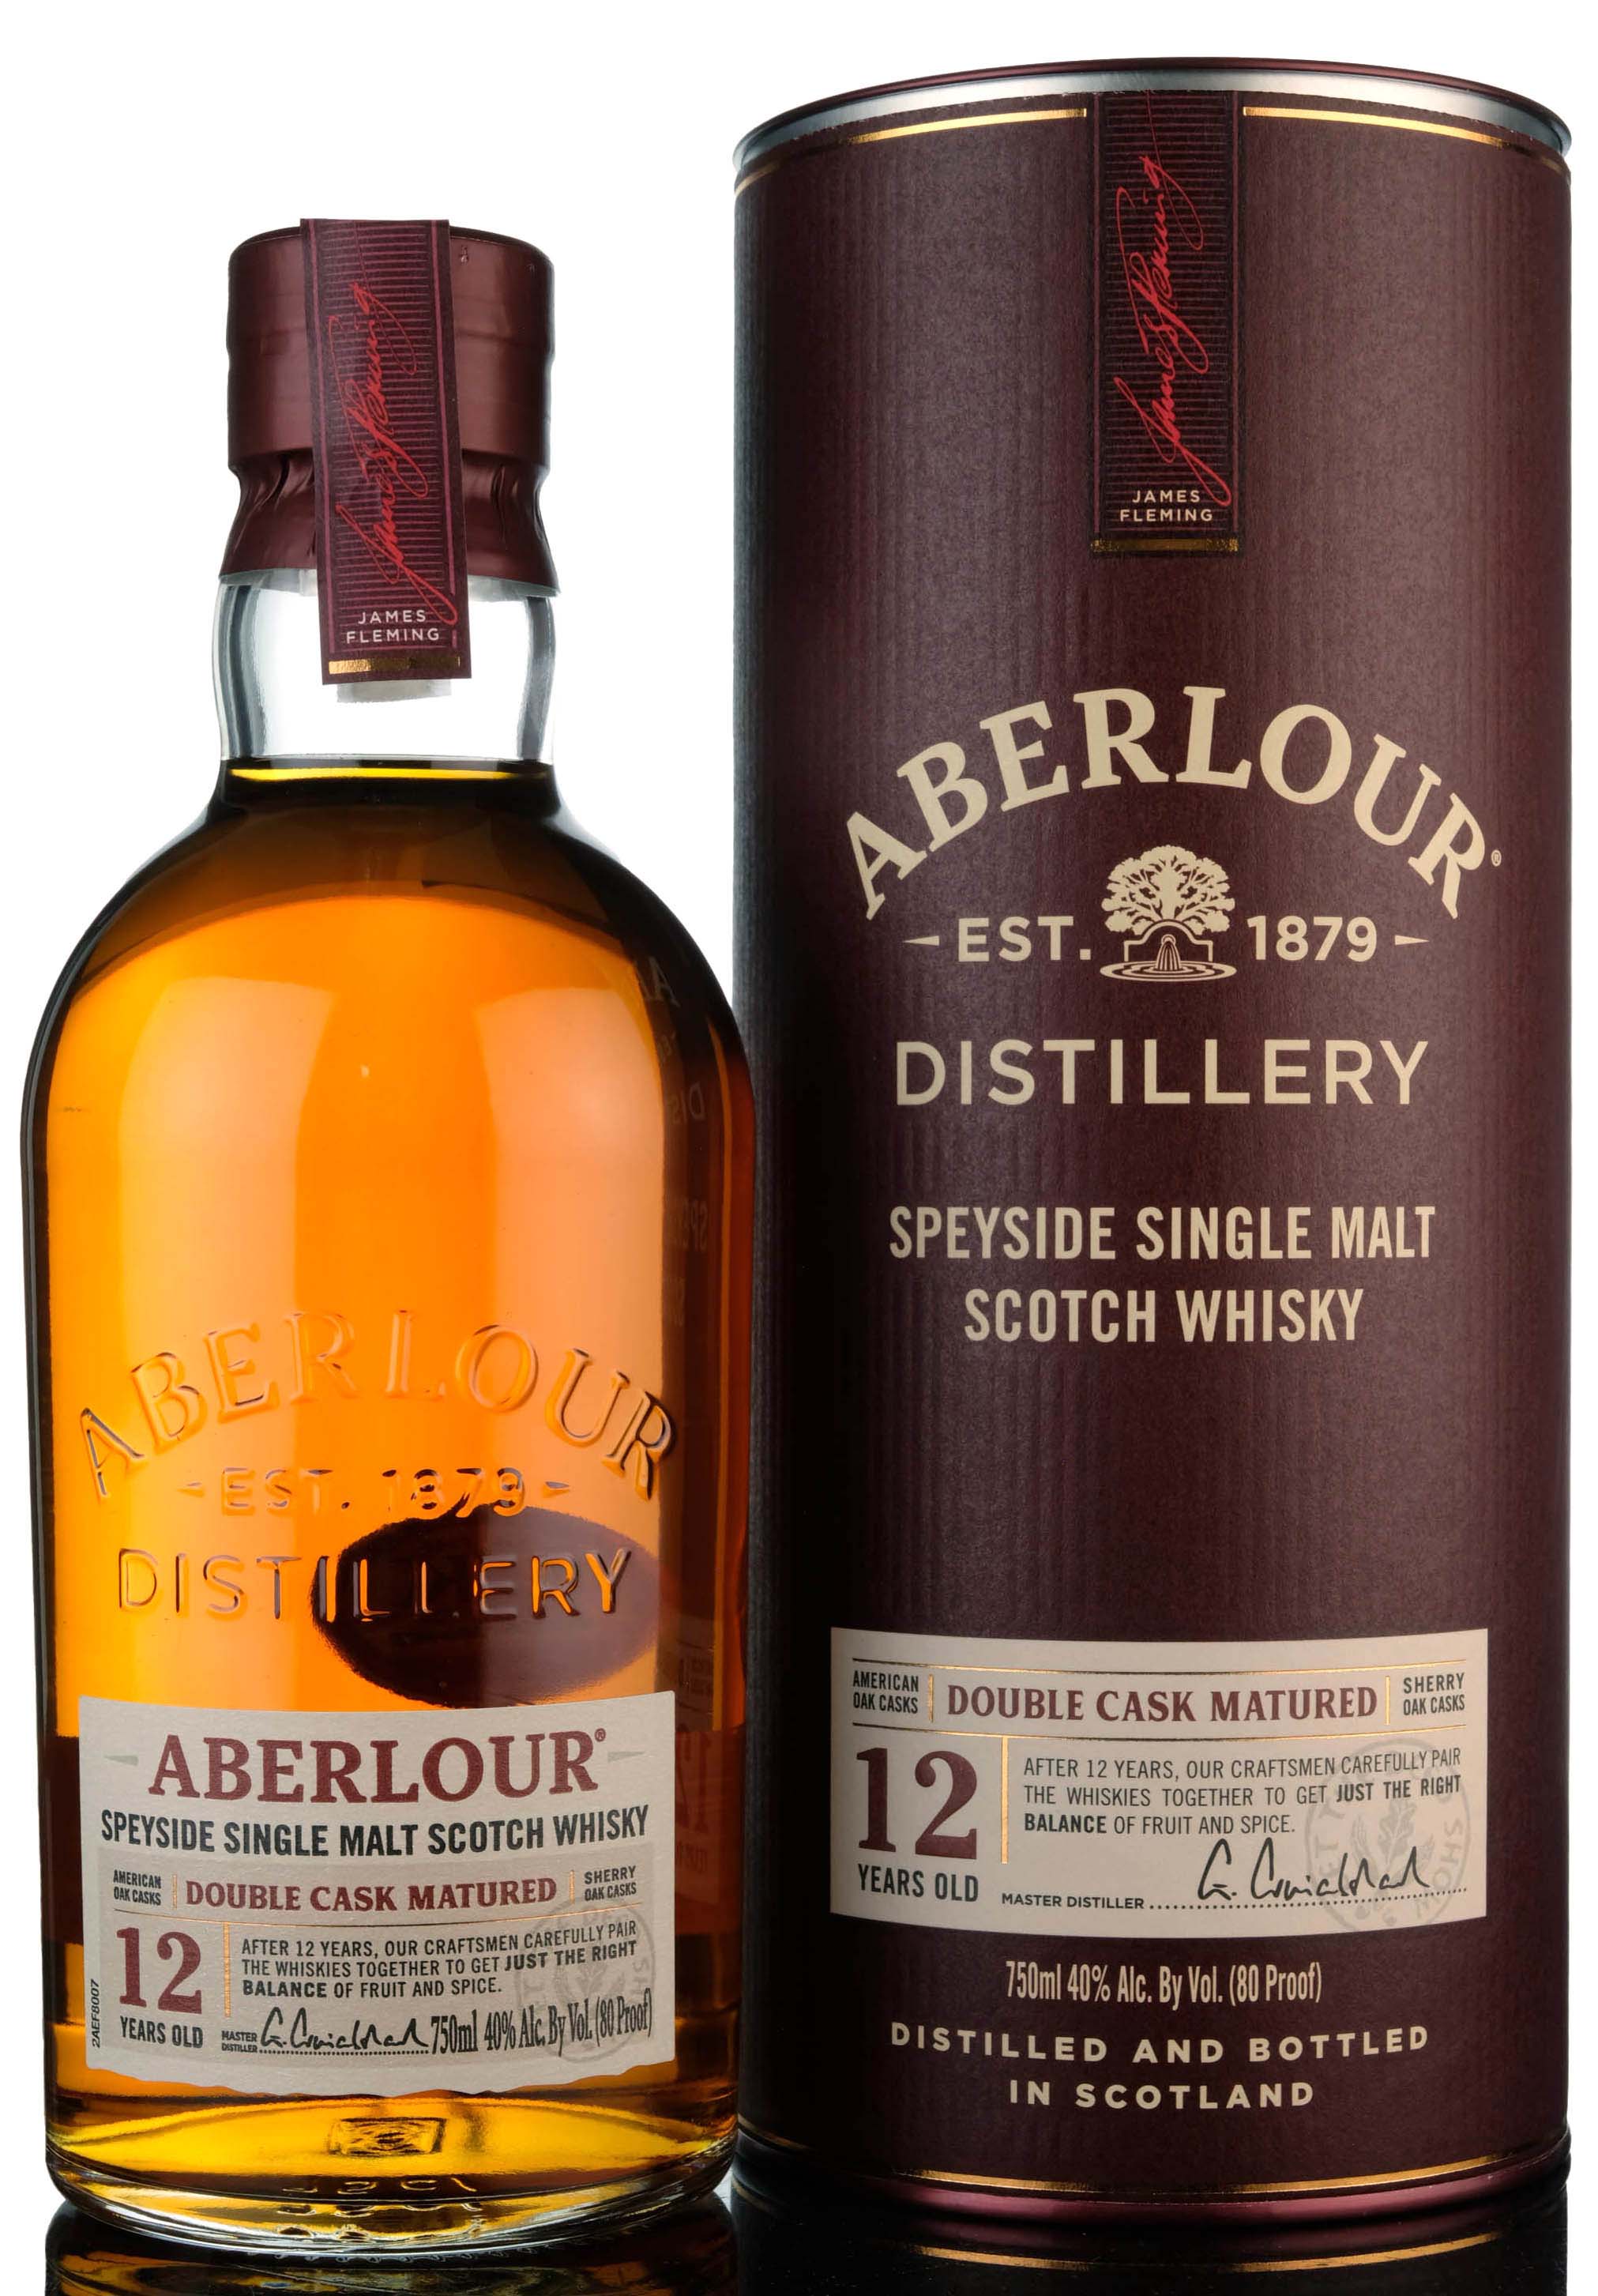 Aberlour 12 Year Old - Double Cask Matured